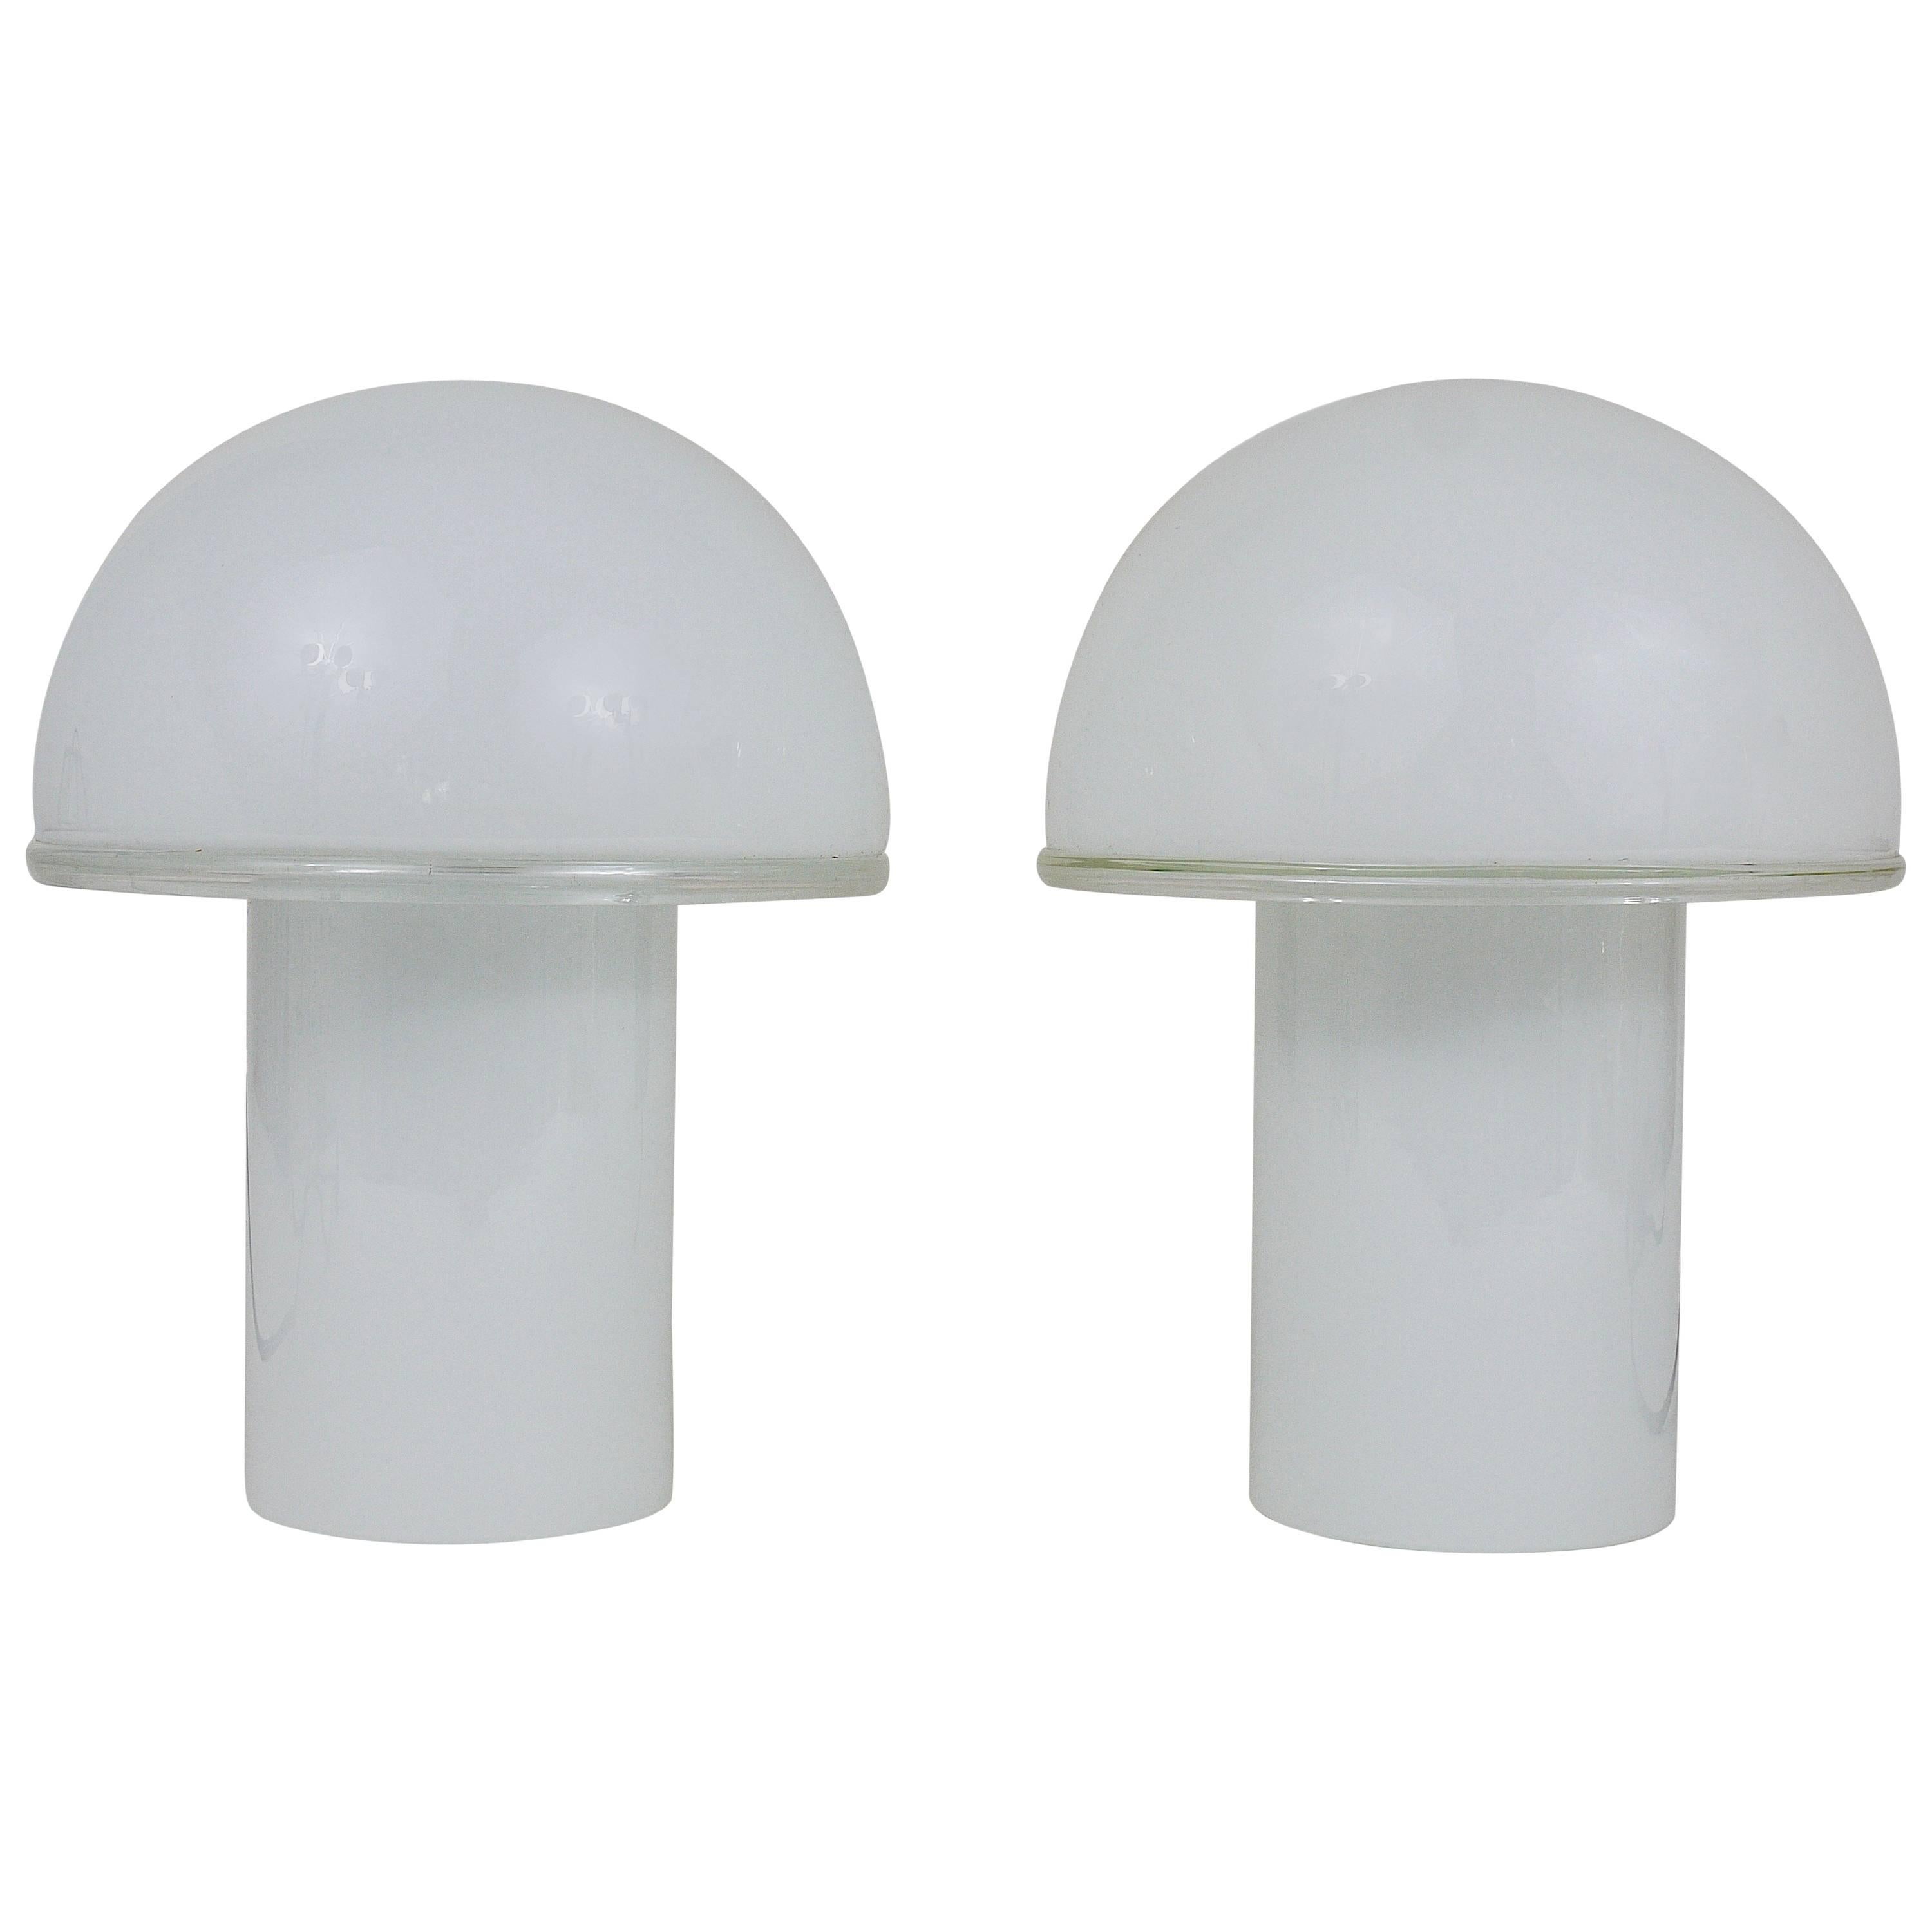 Two White Artemide Onfale Mushroom Murano Glass Table Lamps, Luciano Vistosi